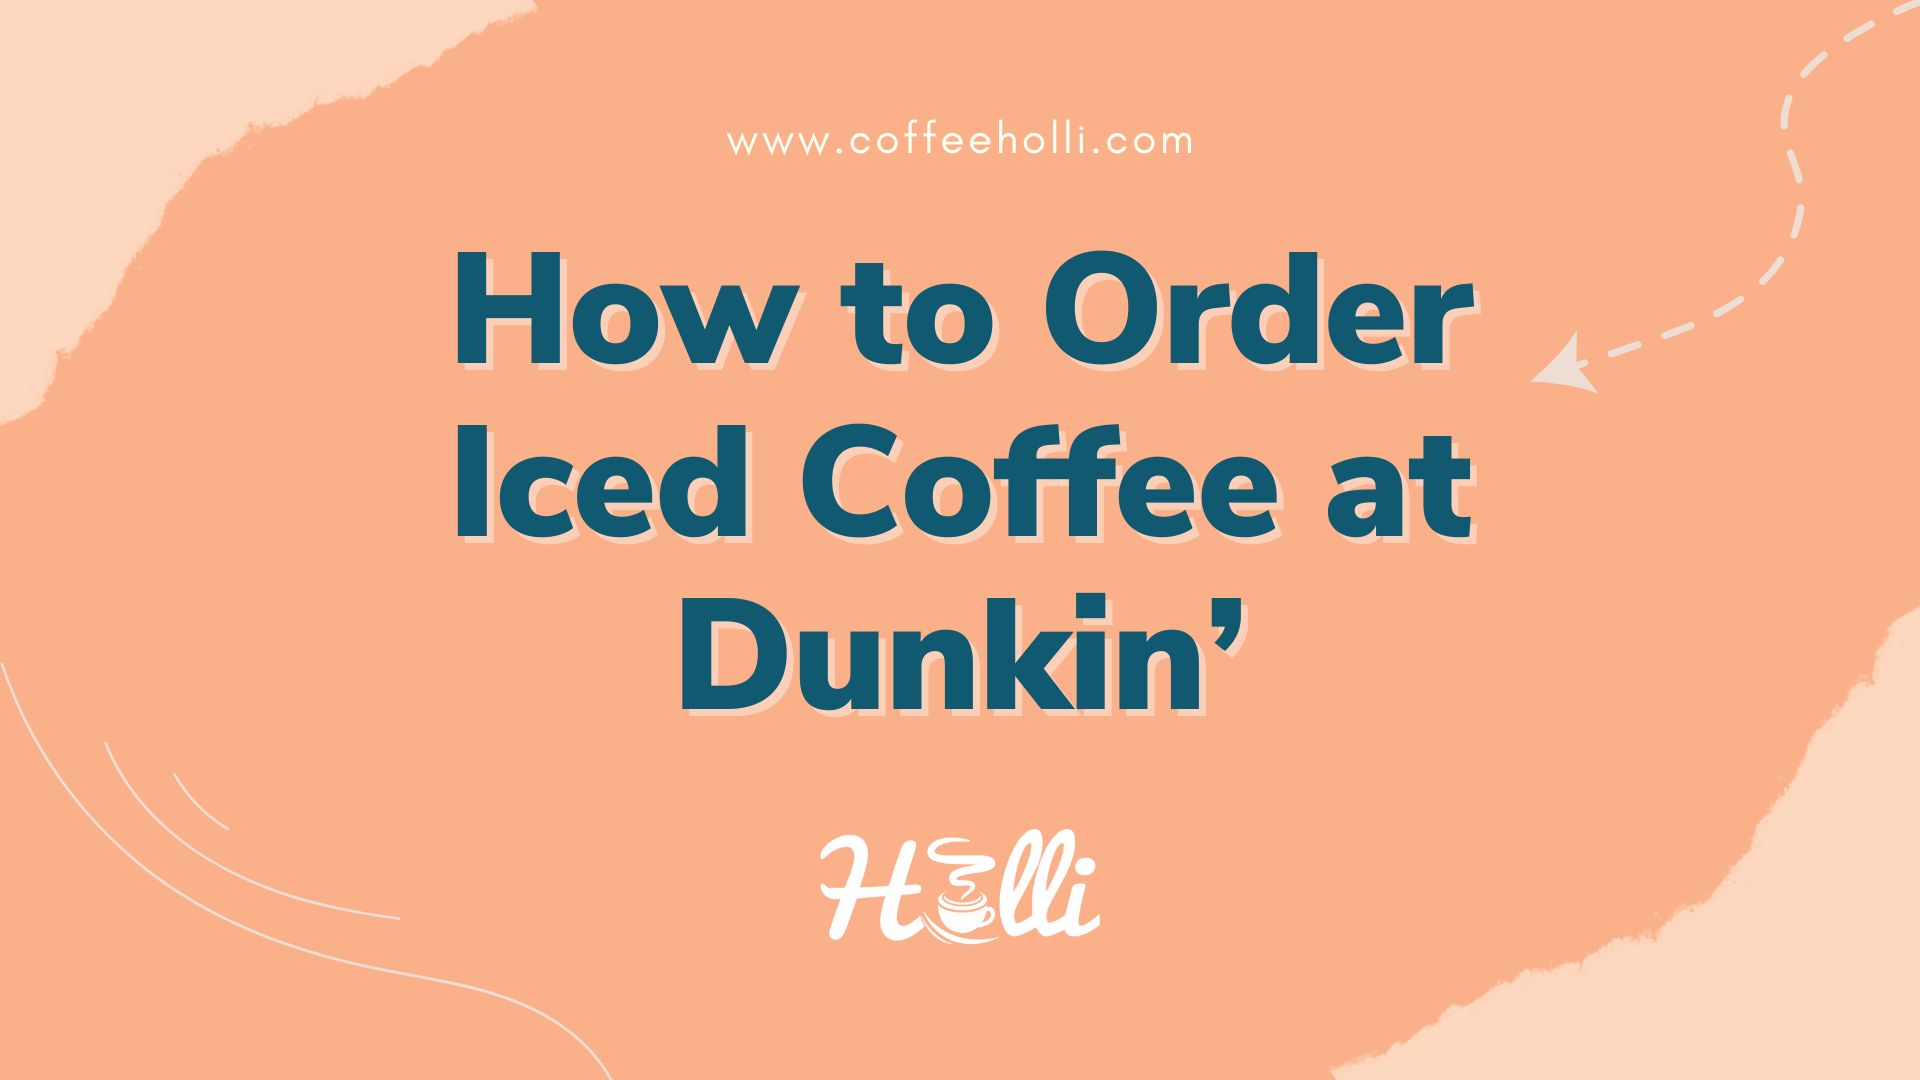 How to Order Iced Coffee at Dunkin